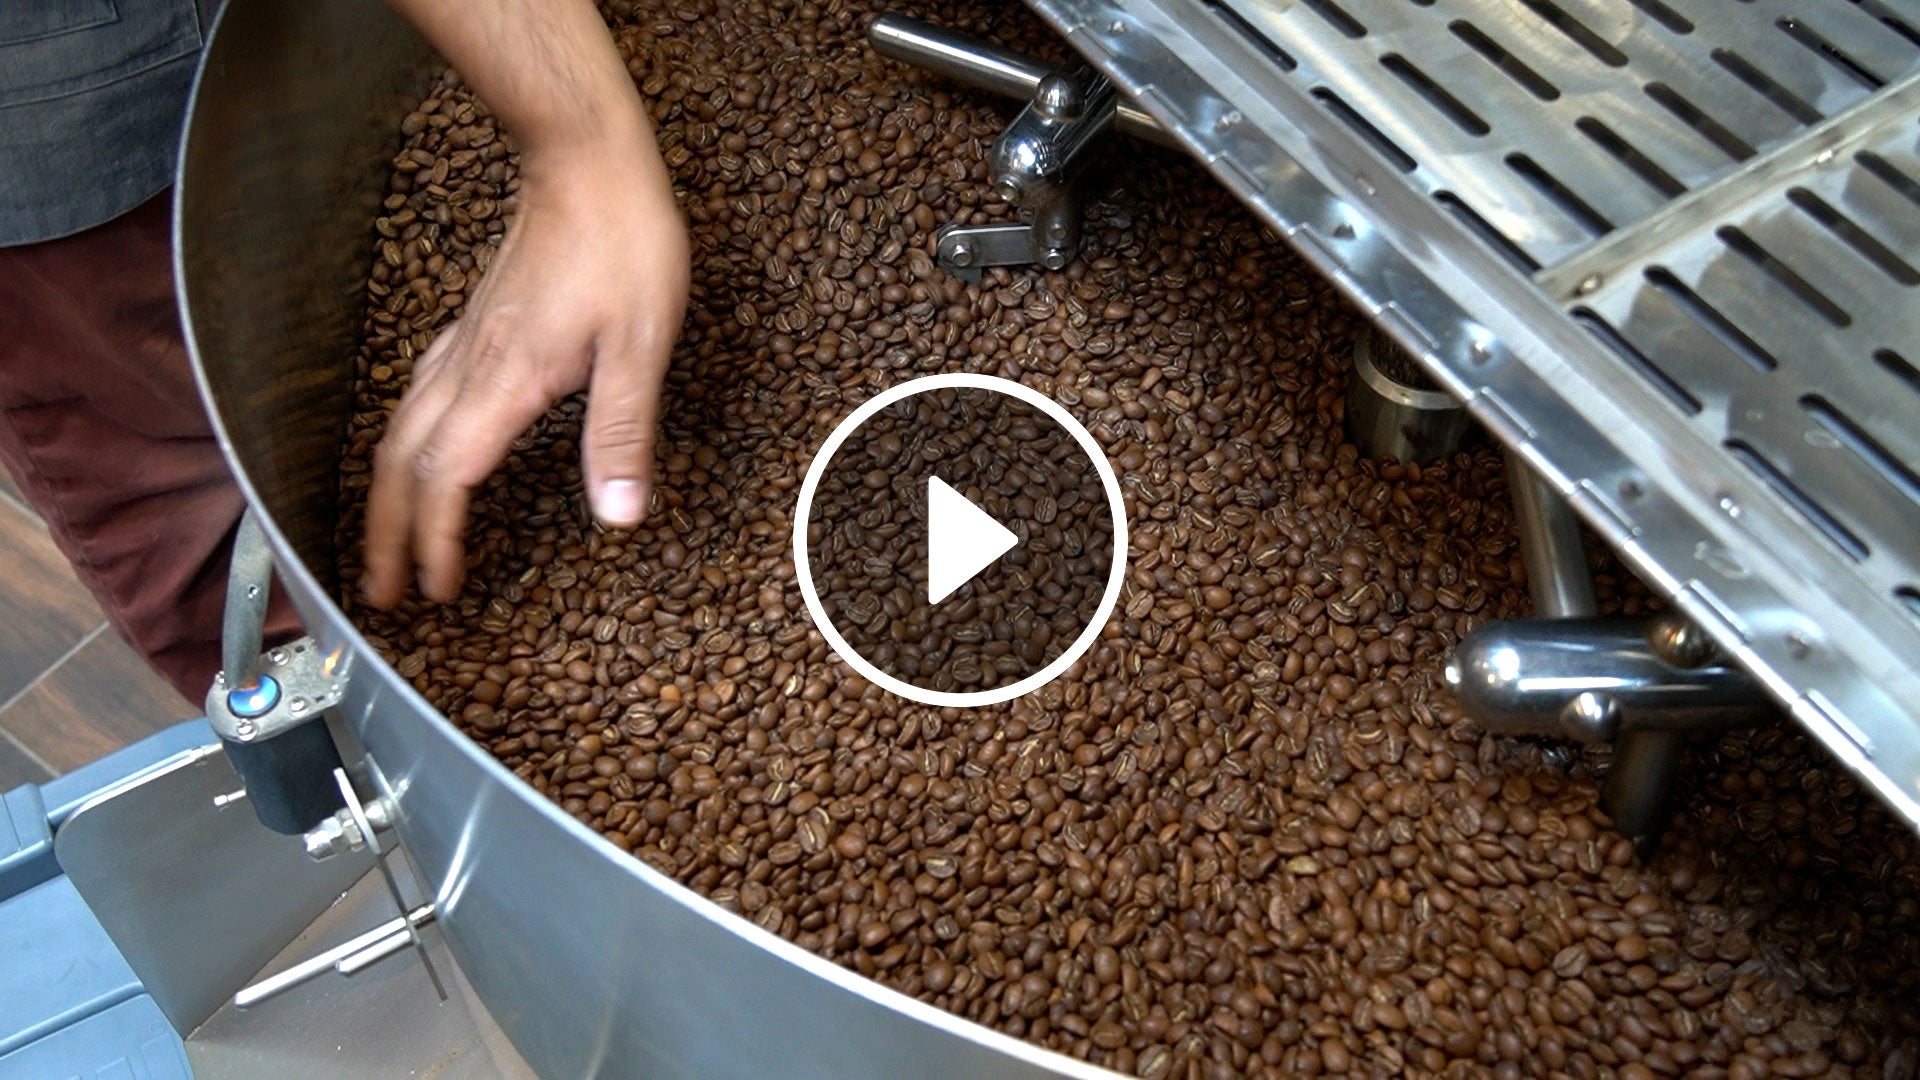 A Buzz-worthy Partnership with Bootstrap Coffee Roasters